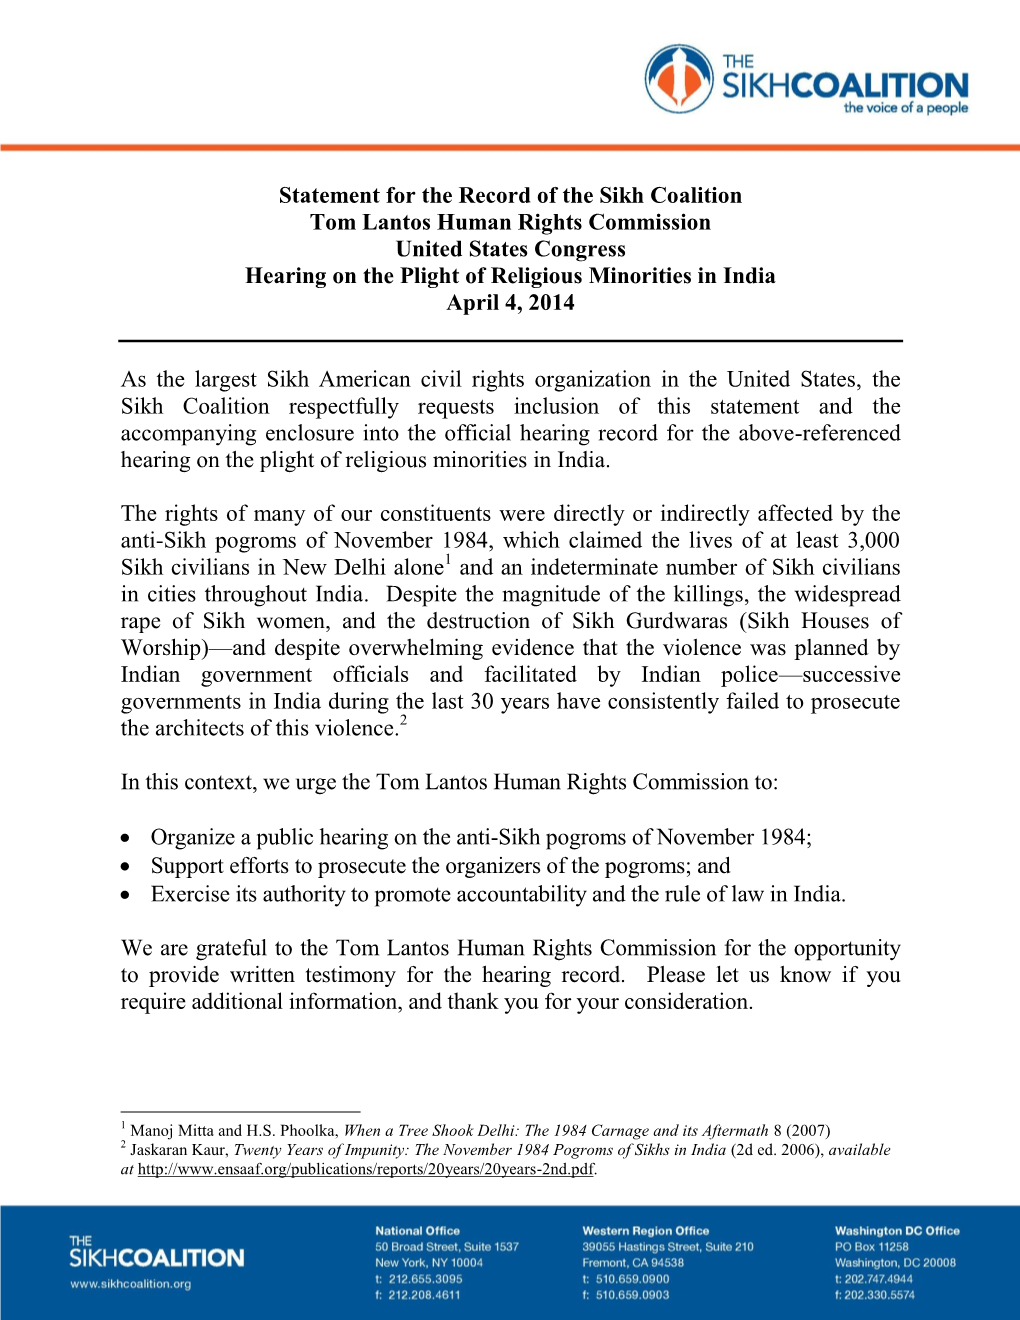 Statement for the Record of the Sikh Coalition Tom Lantos Human